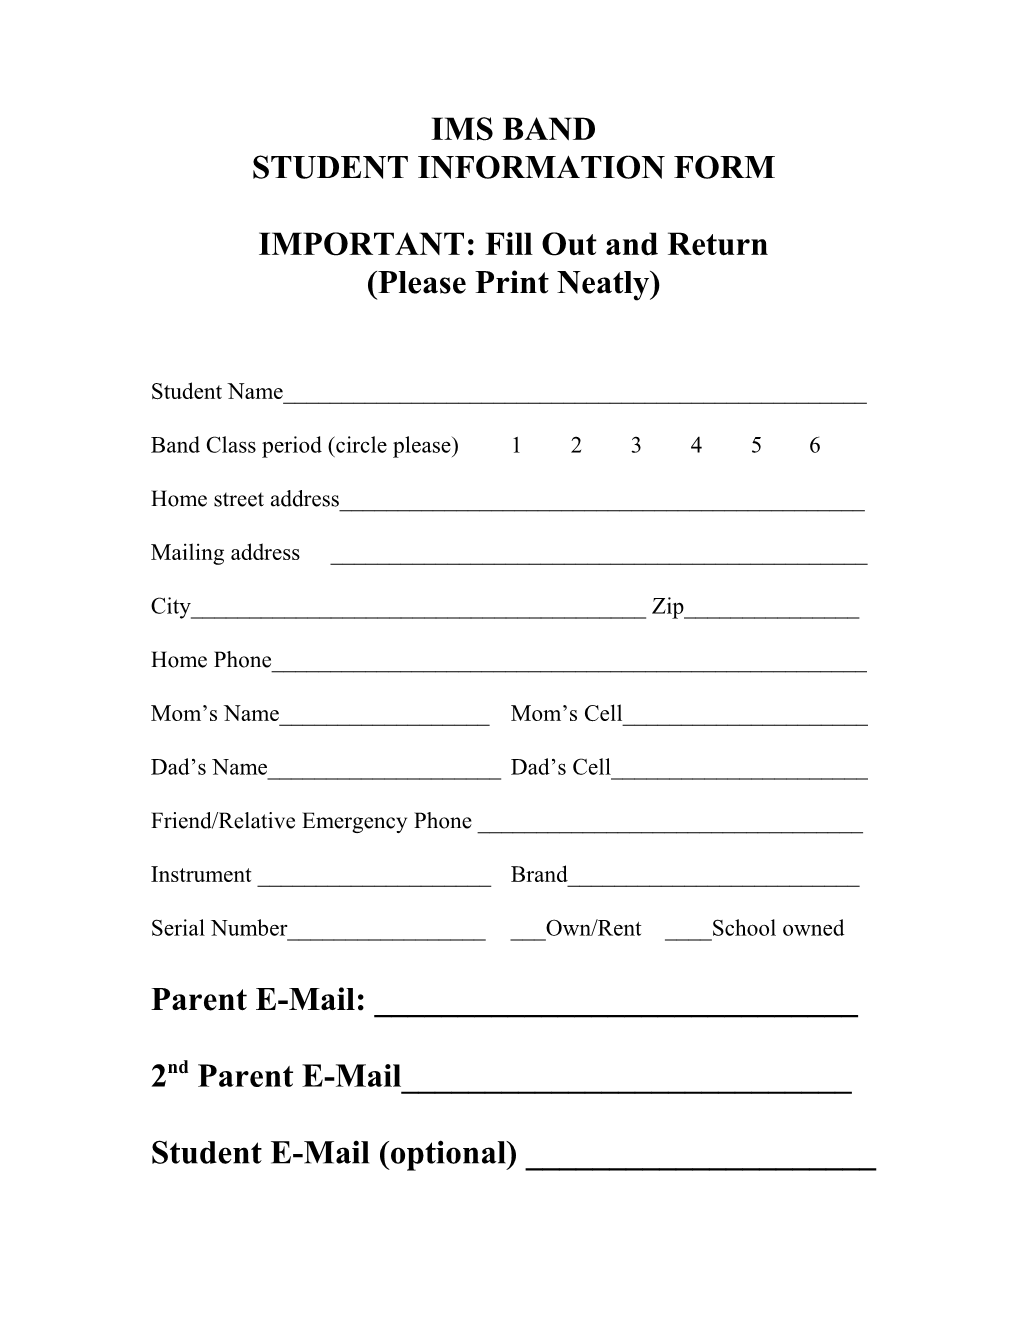 IMPORTANT: Fill out and Return